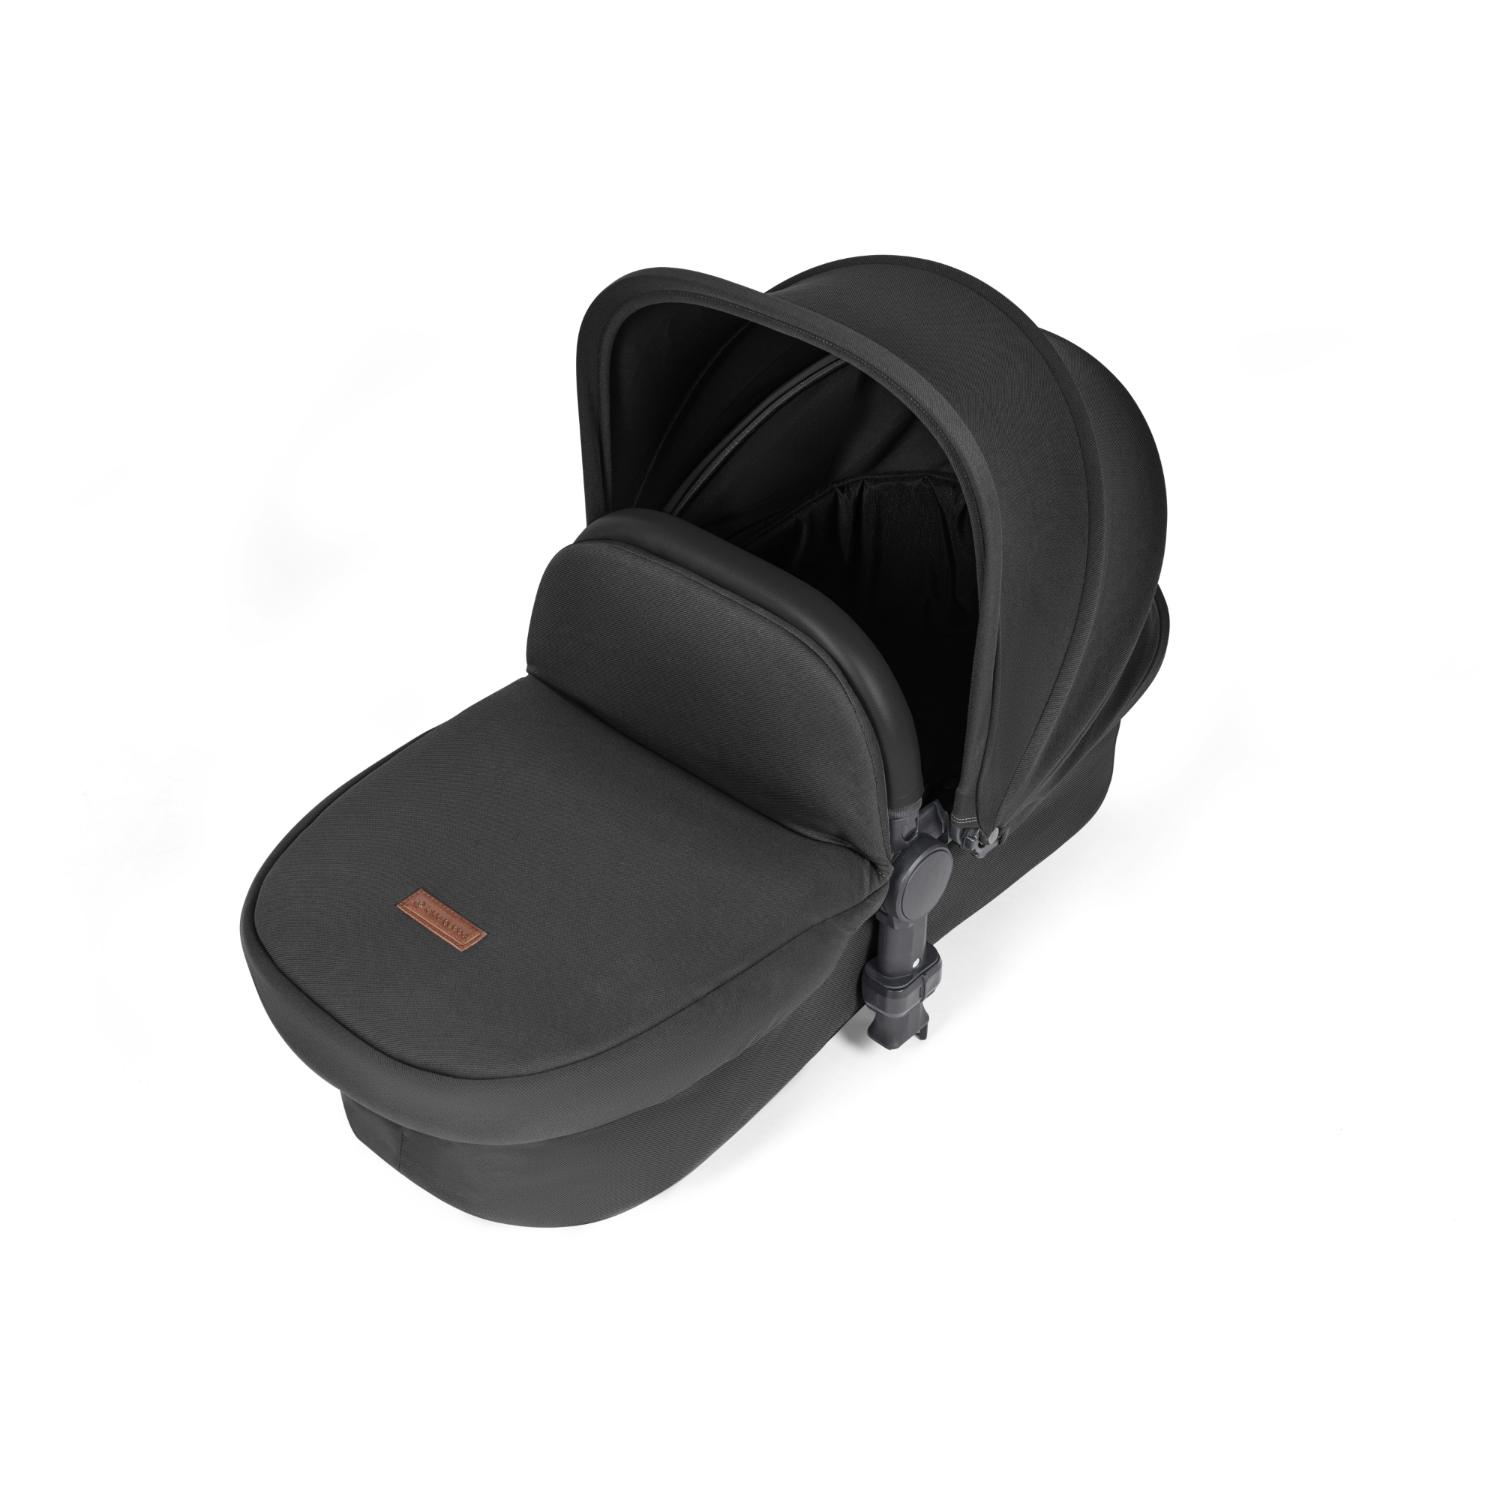 Carrycot in Ickle Bubba Stomp Luxe All-in-One Travel System in Midnight black colour